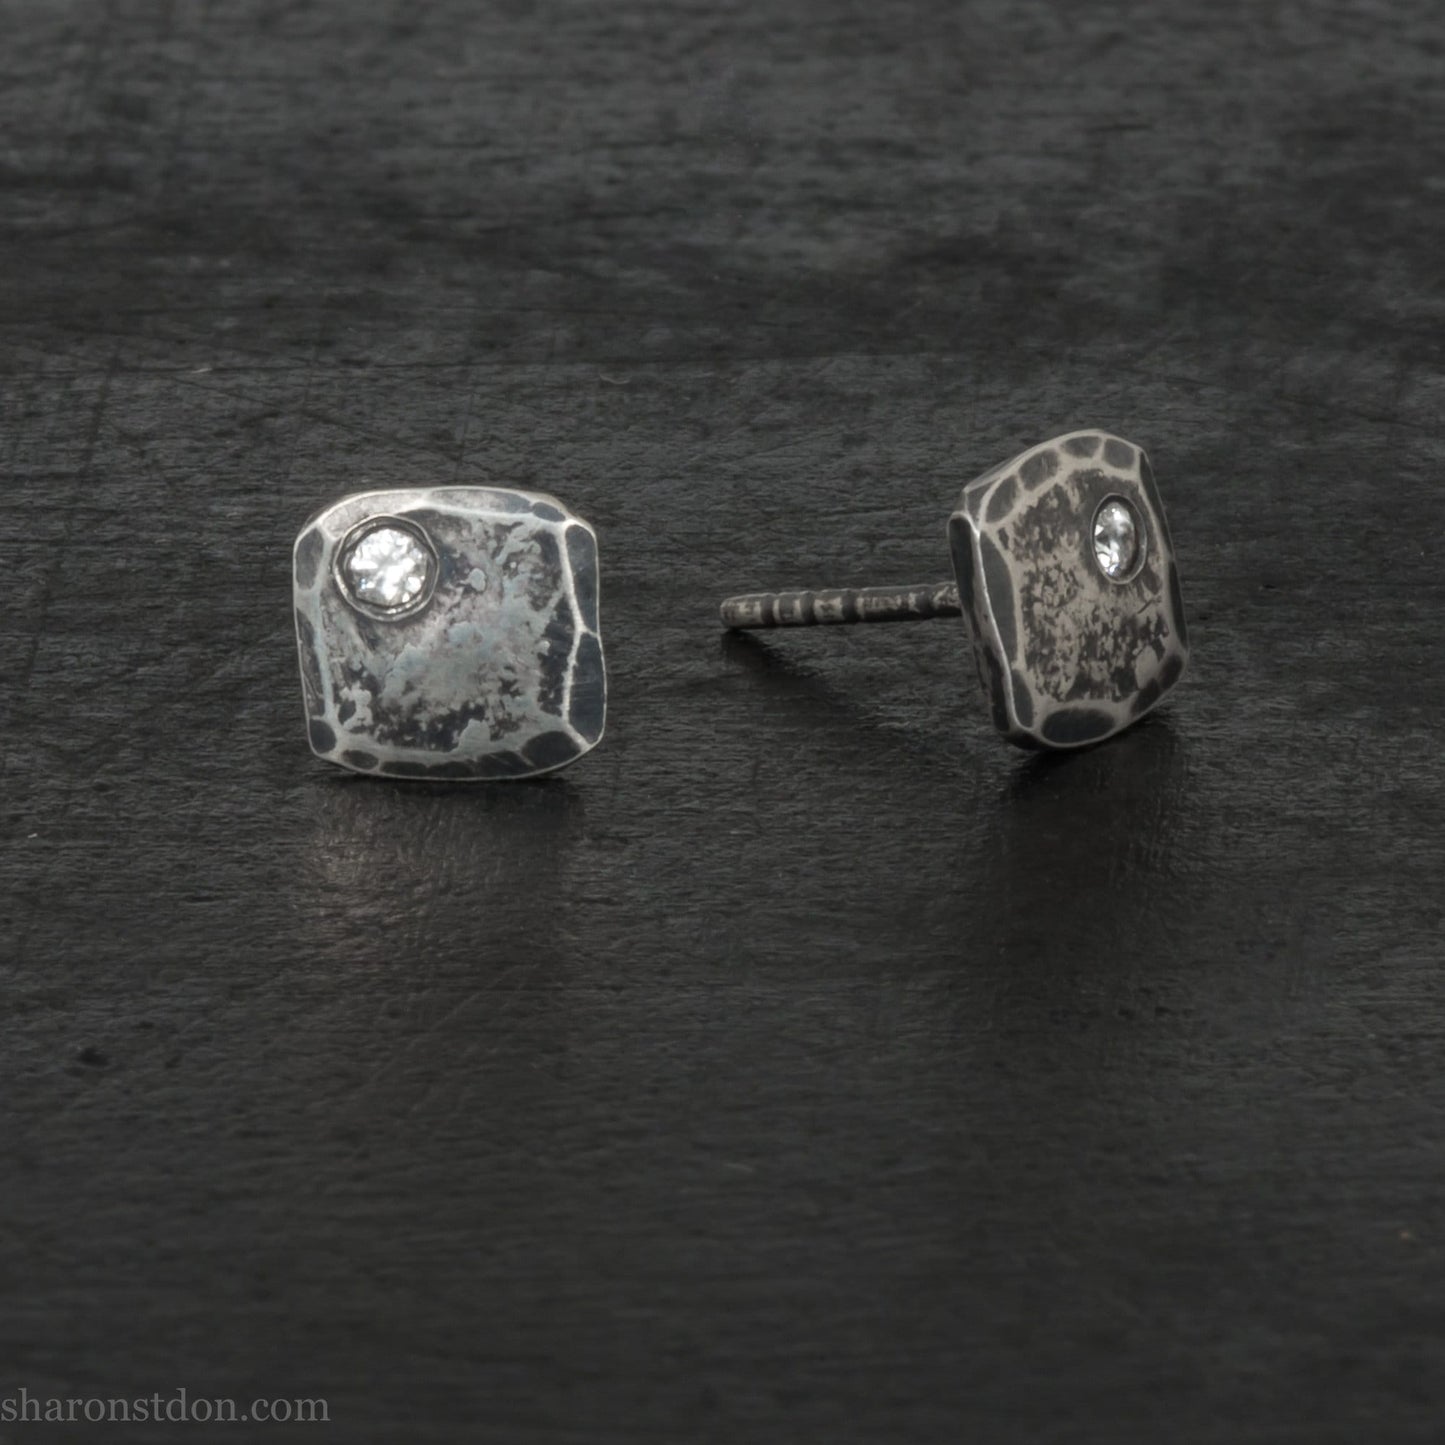 Imitation diamond stud earrings for men or women, non binary | 7mm square, 925 sterling silver studs with antique finish